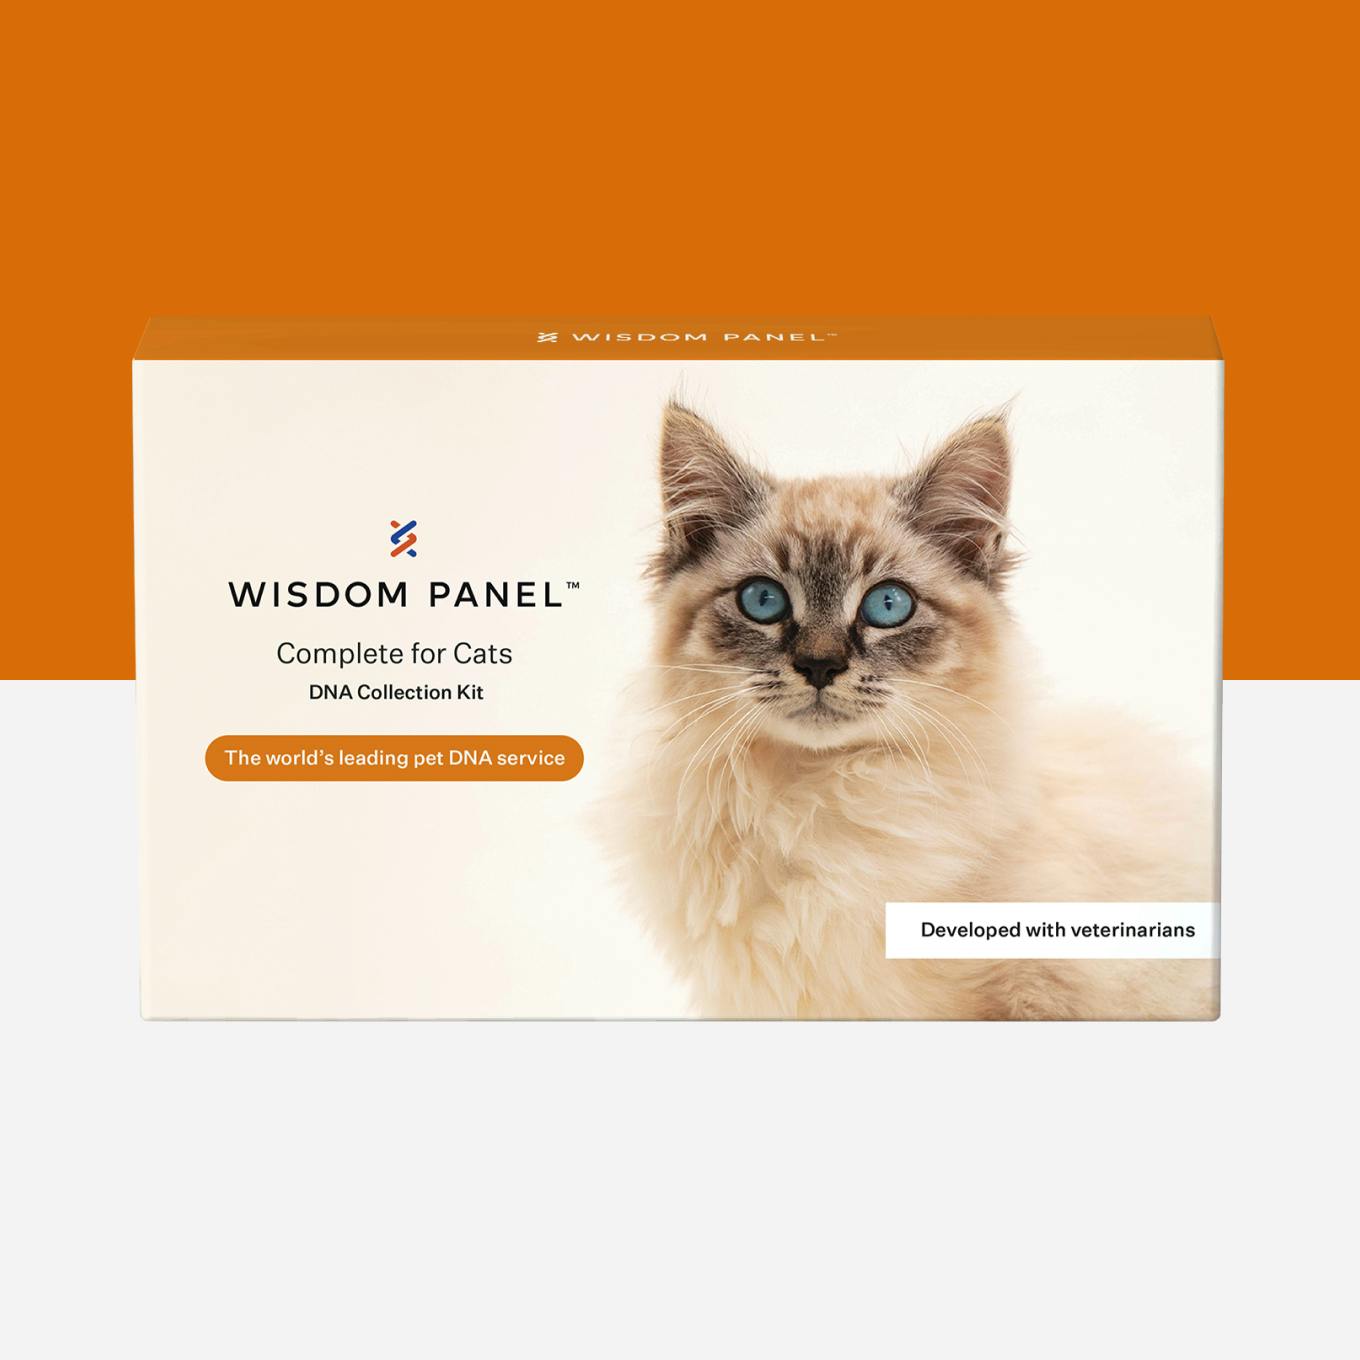 Wisdom Panel™ Complete for Cats DNA collection kit